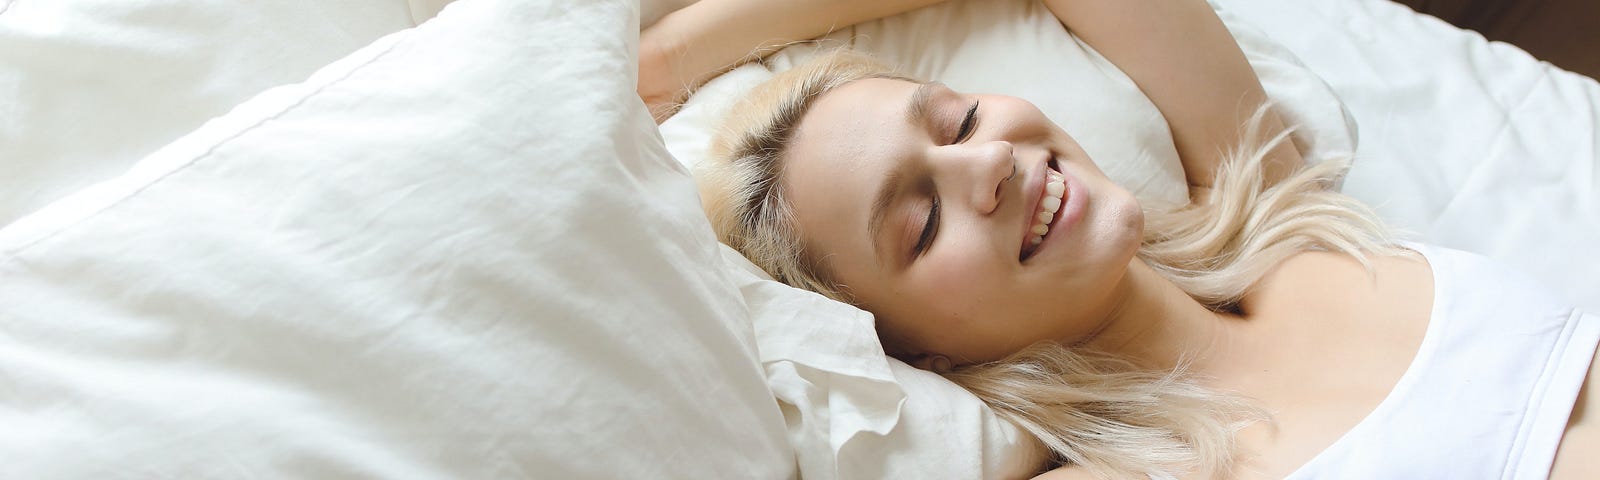 Woman blonde hair white bra top in bed pillows smiling